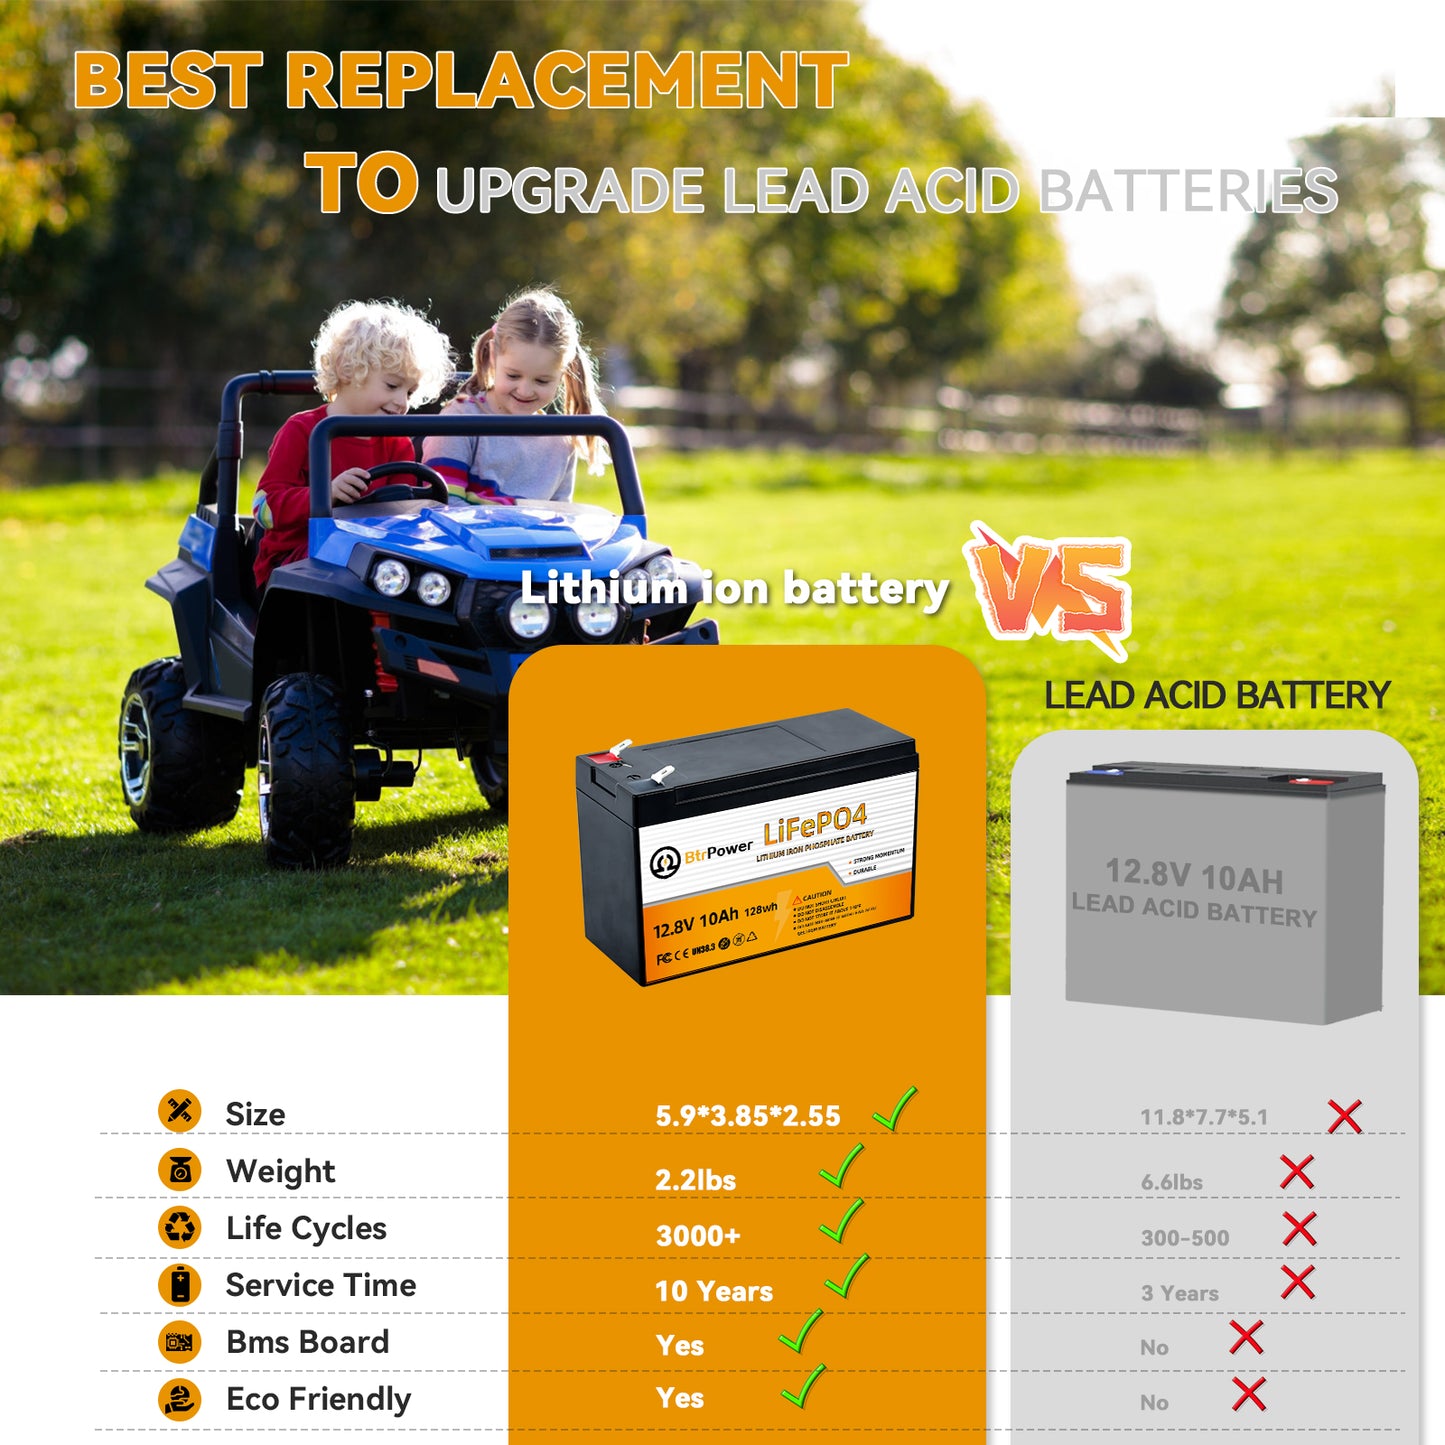 BtrPower LiFePO4 12V 10AH Deep Cycle Lithium Battery Rechargeable for RV Boat Solar Home